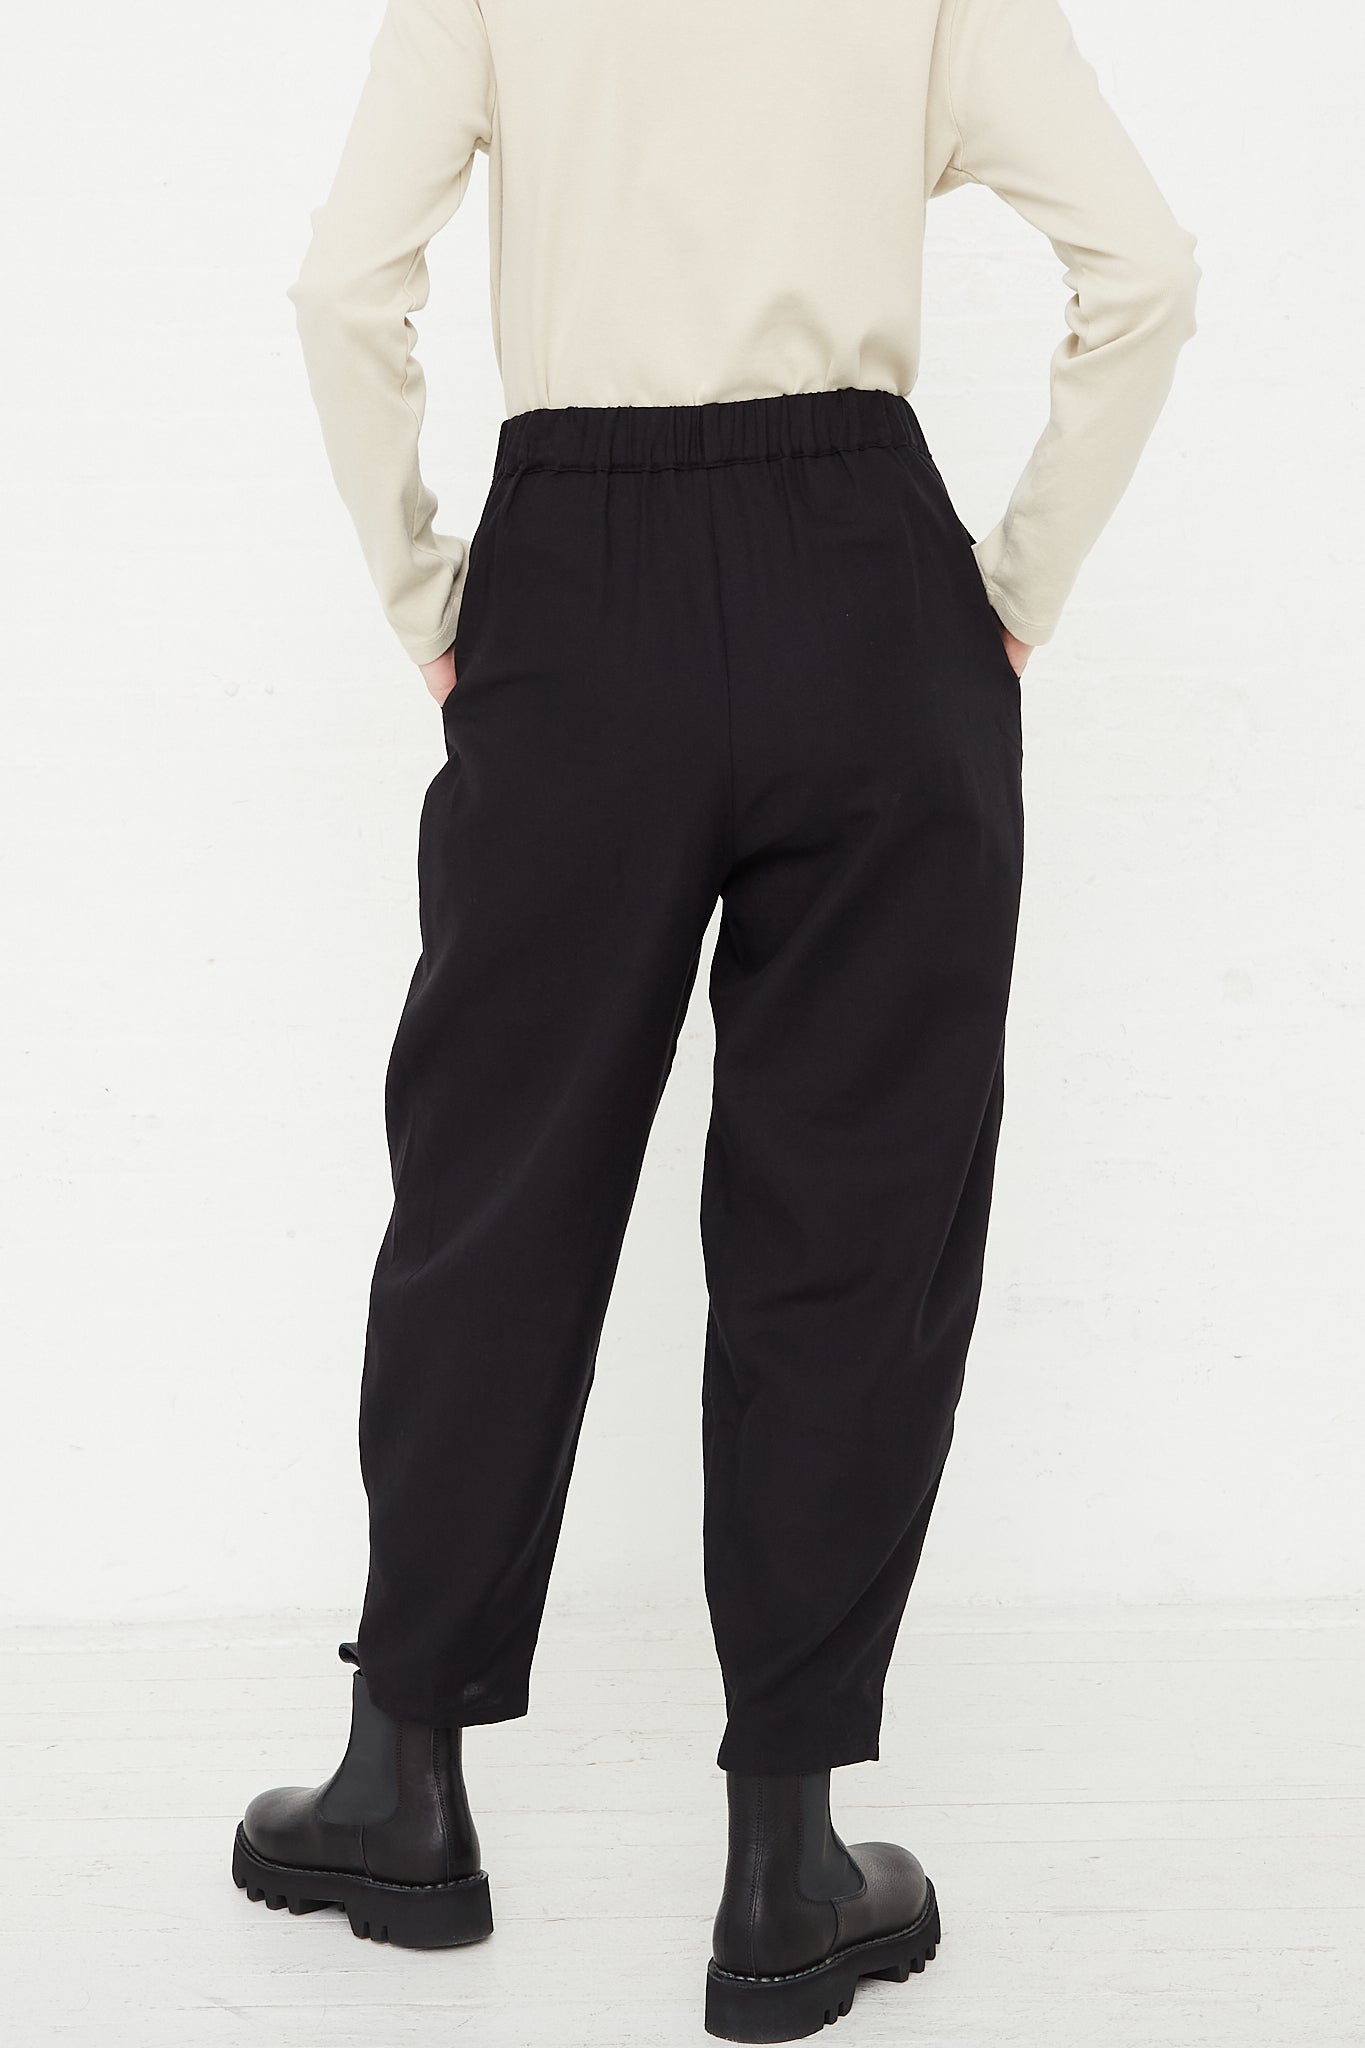 Cotton Twill Draped Pants in Black by Black Crane for Oroboro Back